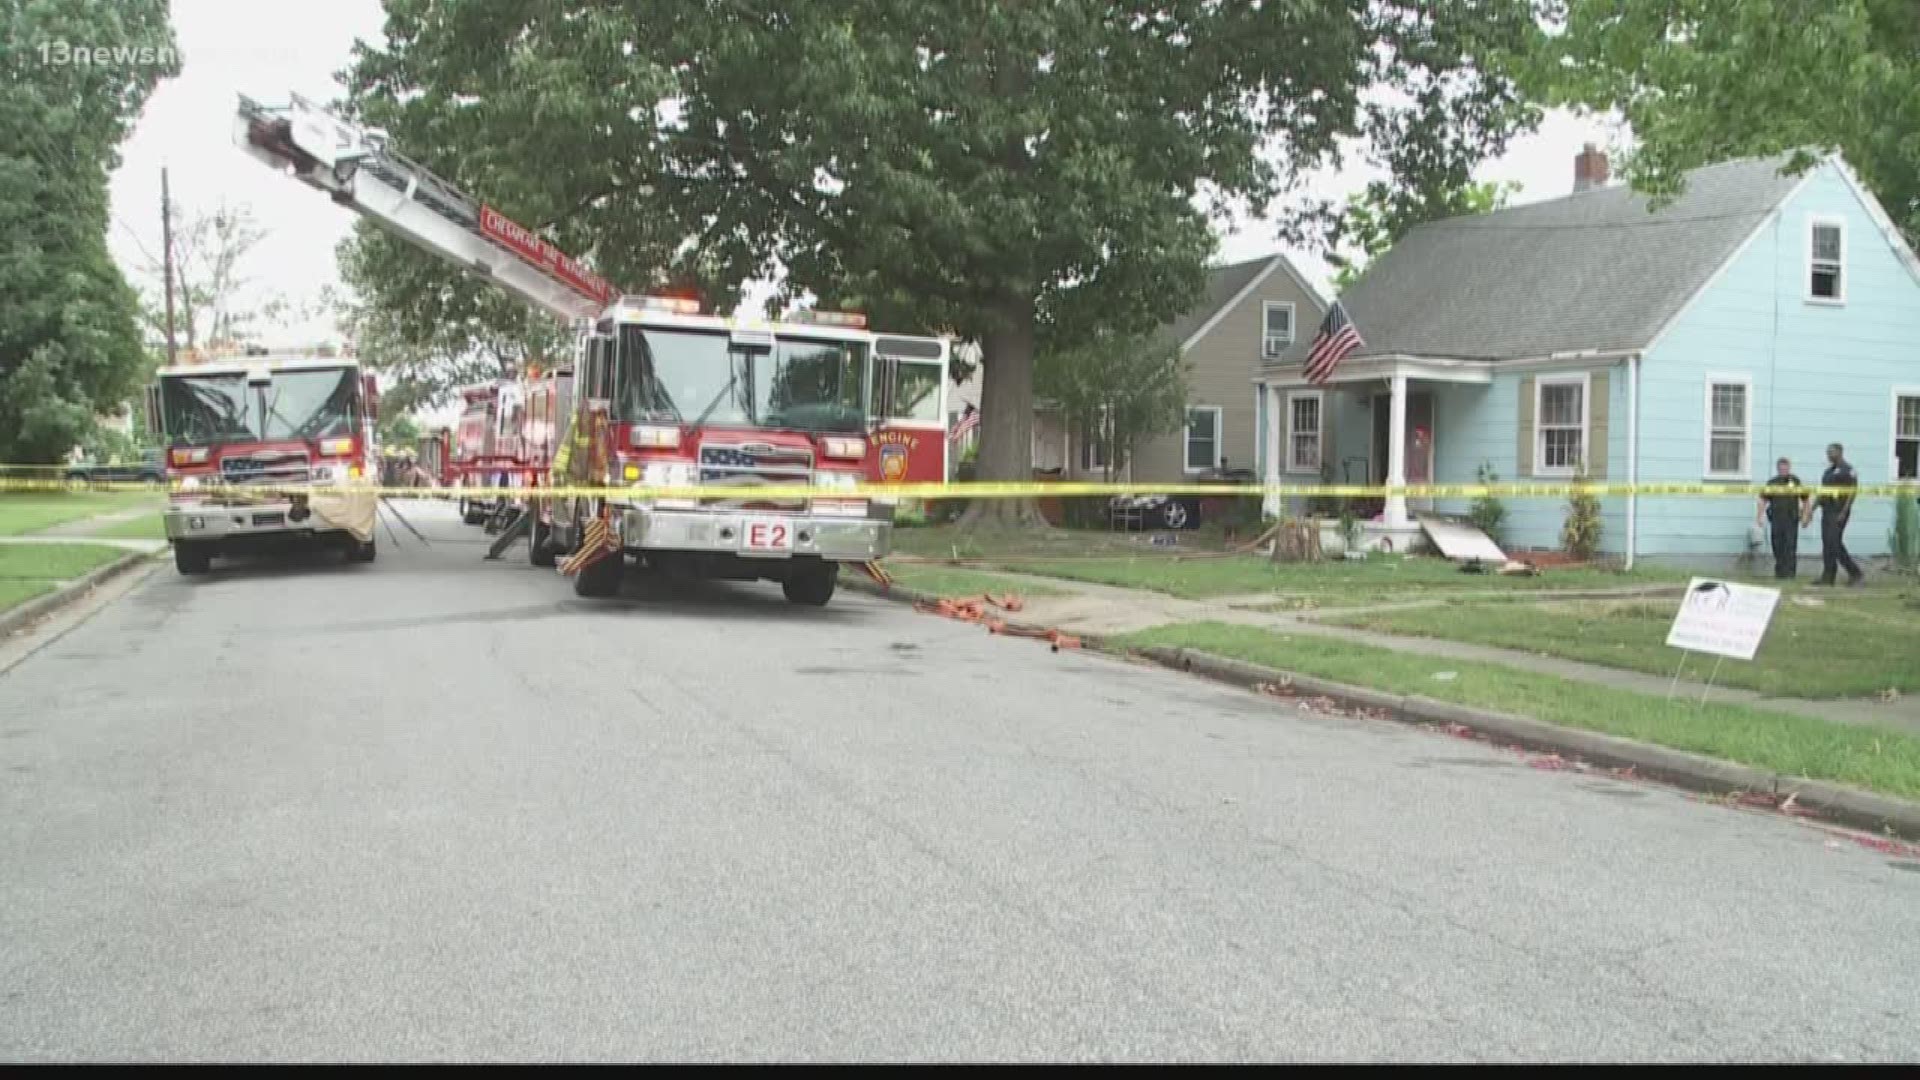 Prosecutors in Chesapeake claim that a mother of five intentionally set her home on fire, with her children inside.